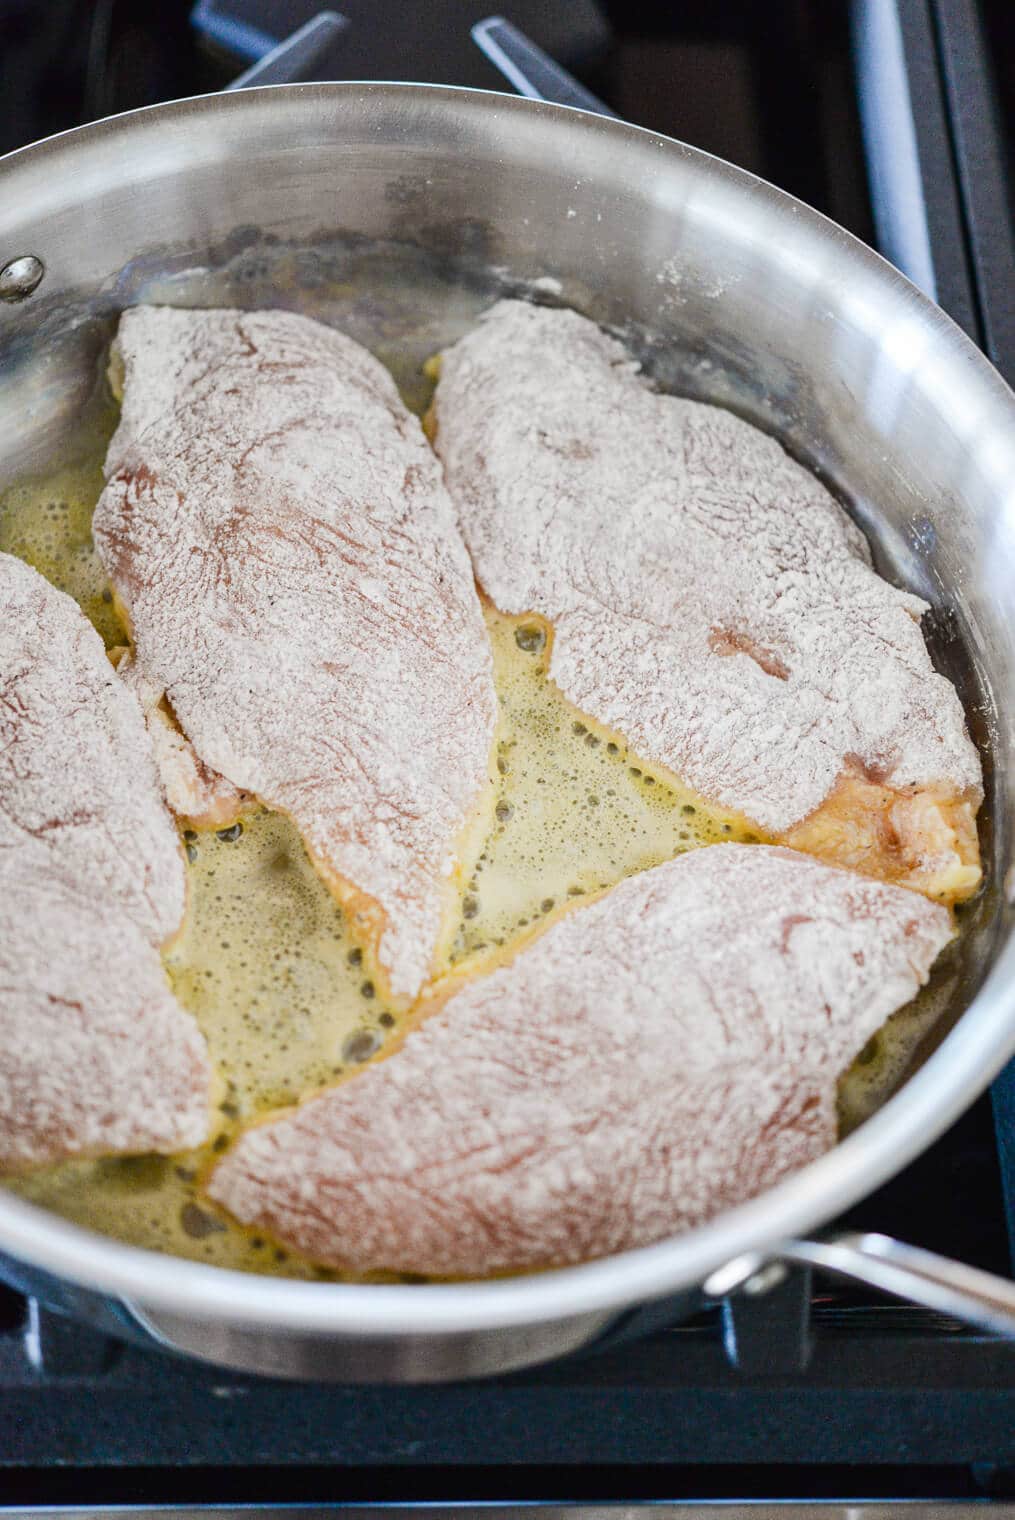 flour coated chicken breasts searing in a skillet of butter